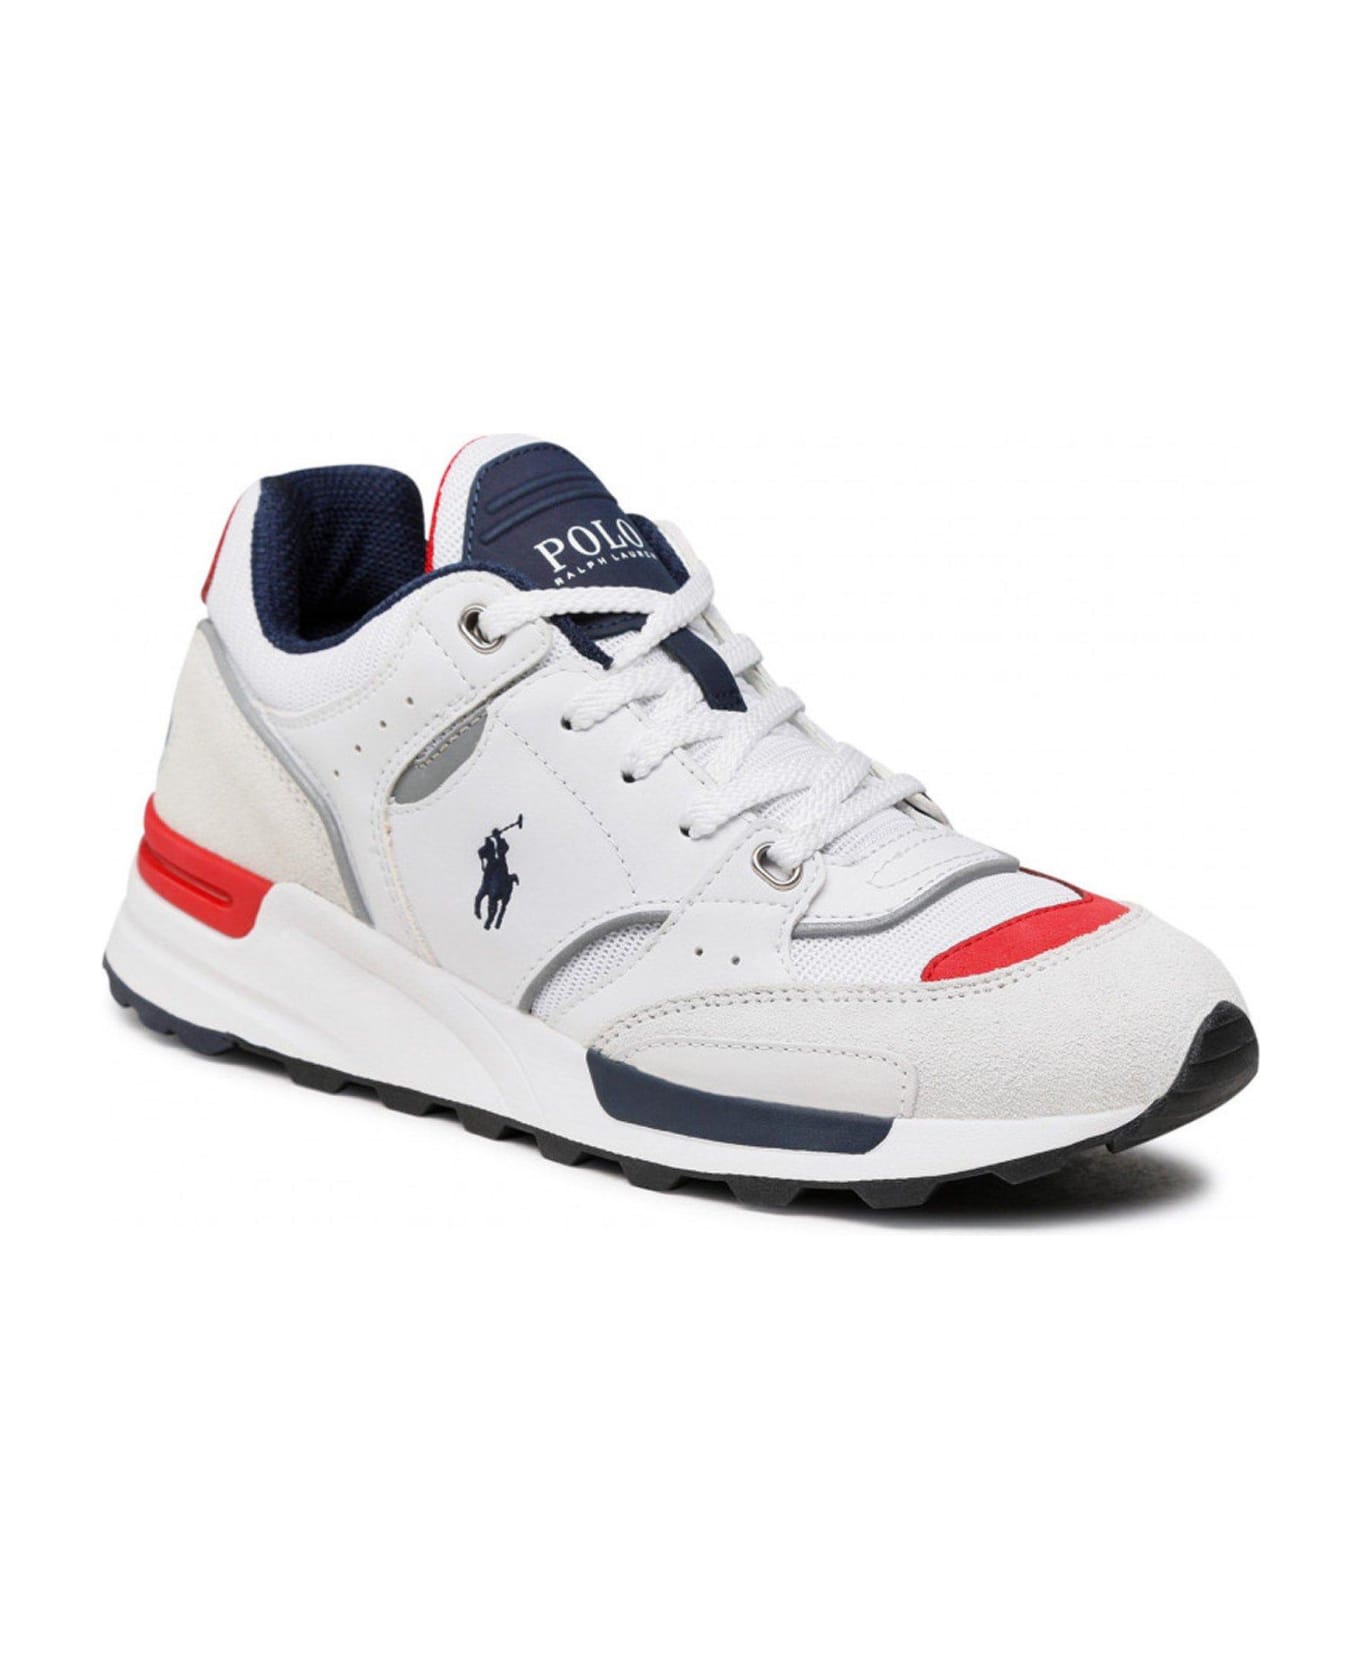 Polo Ralph Lauren Panelled Lace-up Sneakers - Grey/navy/white/red